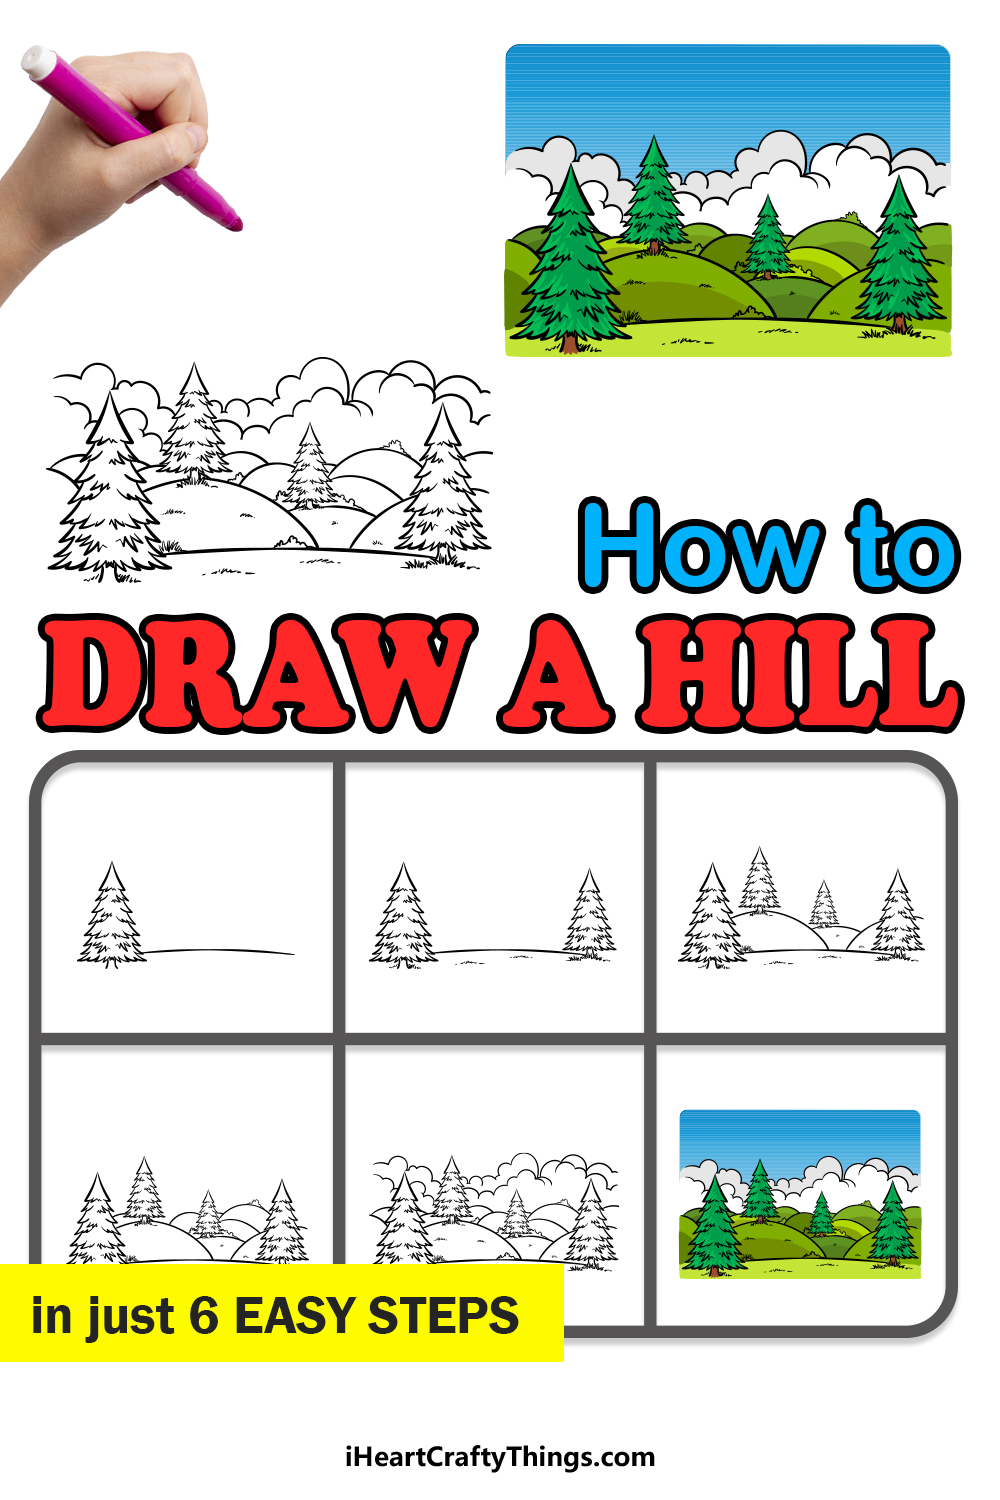 how to draw a Hill in 6 easy steps